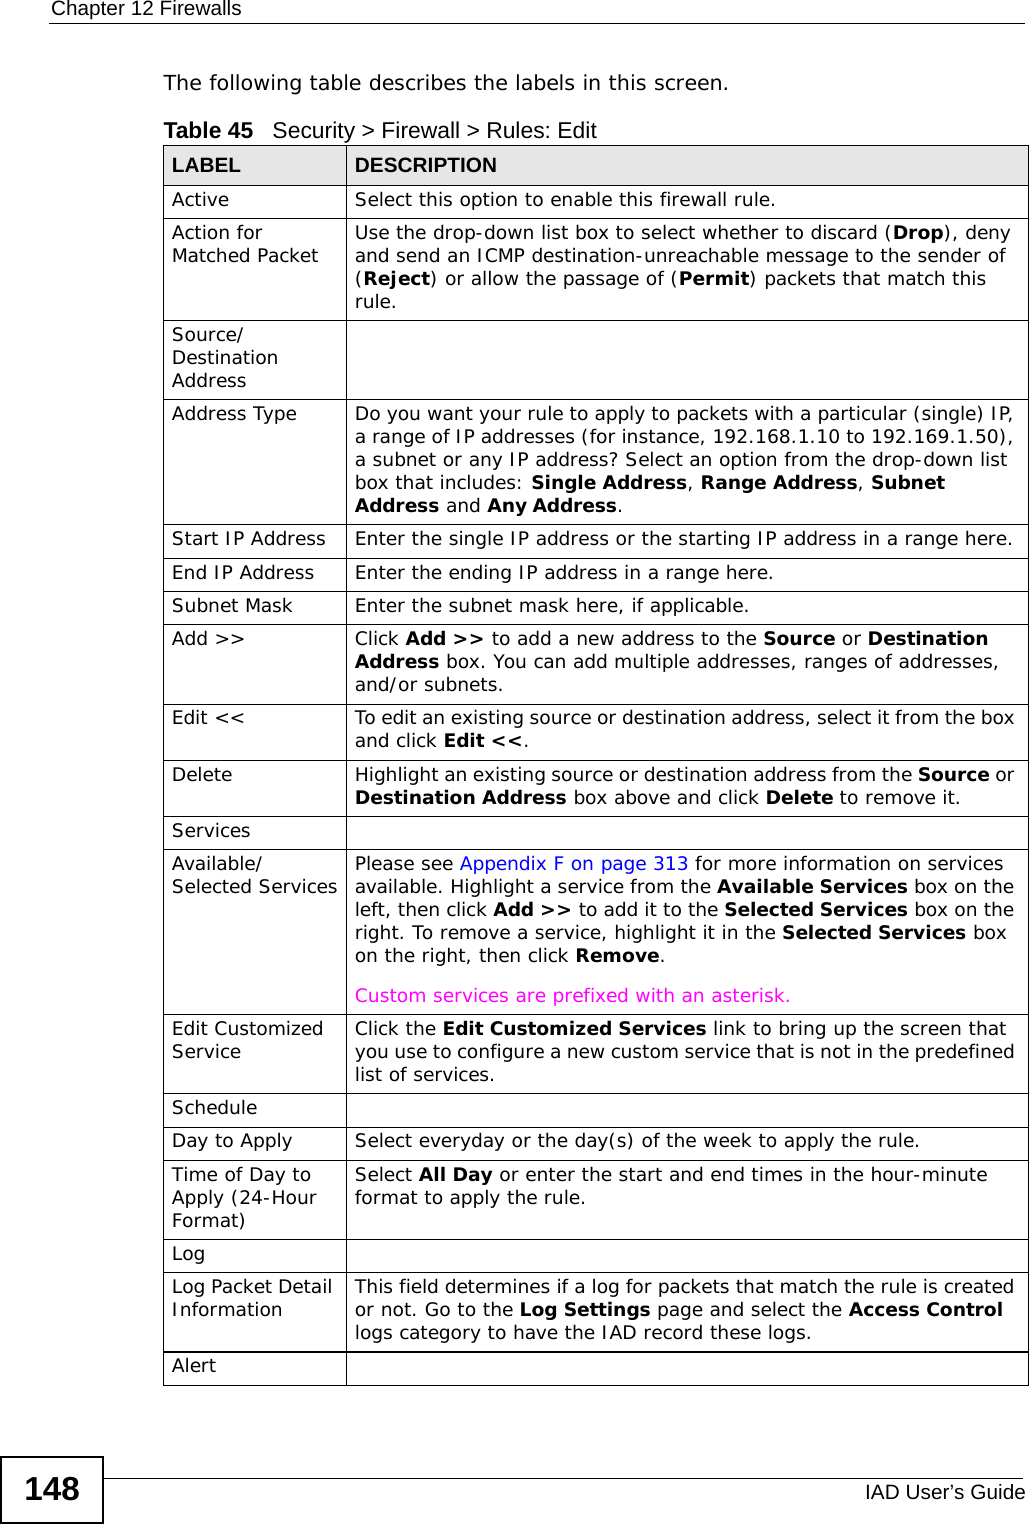 Chapter 12 FirewallsIAD User’s Guide148The following table describes the labels in this screen.Table 45   Security &gt; Firewall &gt; Rules: EditLABEL DESCRIPTIONActive Select this option to enable this firewall rule. Action for Matched Packet Use the drop-down list box to select whether to discard (Drop), deny and send an ICMP destination-unreachable message to the sender of (Reject) or allow the passage of (Permit) packets that match this rule. Source/Destination AddressAddress Type Do you want your rule to apply to packets with a particular (single) IP, a range of IP addresses (for instance, 192.168.1.10 to 192.169.1.50), a subnet or any IP address? Select an option from the drop-down list box that includes: Single Address, Range Address, Subnet Address and Any Address. Start IP Address Enter the single IP address or the starting IP address in a range here. End IP Address Enter the ending IP address in a range here.Subnet Mask Enter the subnet mask here, if applicable.Add &gt;&gt; Click Add &gt;&gt; to add a new address to the Source or Destination Address box. You can add multiple addresses, ranges of addresses, and/or subnets.Edit &lt;&lt; To edit an existing source or destination address, select it from the box and click Edit &lt;&lt;.Delete Highlight an existing source or destination address from the Source or Destination Address box above and click Delete to remove it.ServicesAvailable/ Selected Services Please see Appendix F on page 313 for more information on services available. Highlight a service from the Available Services box on the left, then click Add &gt;&gt; to add it to the Selected Services box on the right. To remove a service, highlight it in the Selected Services box on the right, then click Remove.Custom services are prefixed with an asterisk.Edit Customized Service Click the Edit Customized Services link to bring up the screen that you use to configure a new custom service that is not in the predefined list of services.ScheduleDay to Apply Select everyday or the day(s) of the week to apply the rule.Time of Day to Apply (24-Hour Format)Select All Day or enter the start and end times in the hour-minute format to apply the rule.LogLog Packet Detail Information  This field determines if a log for packets that match the rule is created or not. Go to the Log Settings page and select the Access Control logs category to have the IAD record these logs.Alert 